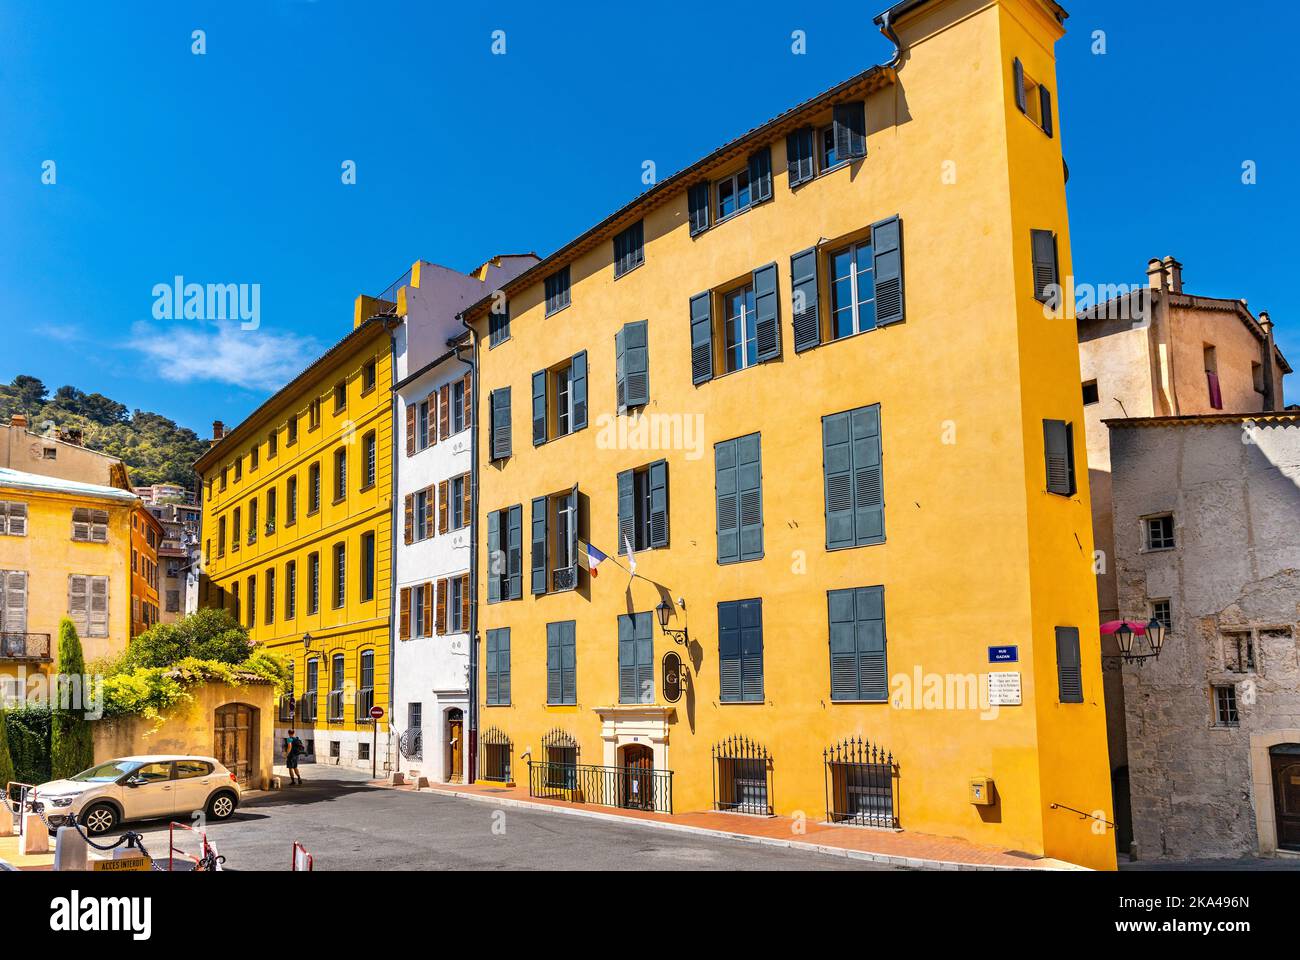 Grasse, France - August 6, 2022: Historic medieval tenement houses at Place du Petit Puy square in old town quarter of perfumery city of Grasse Stock Photo